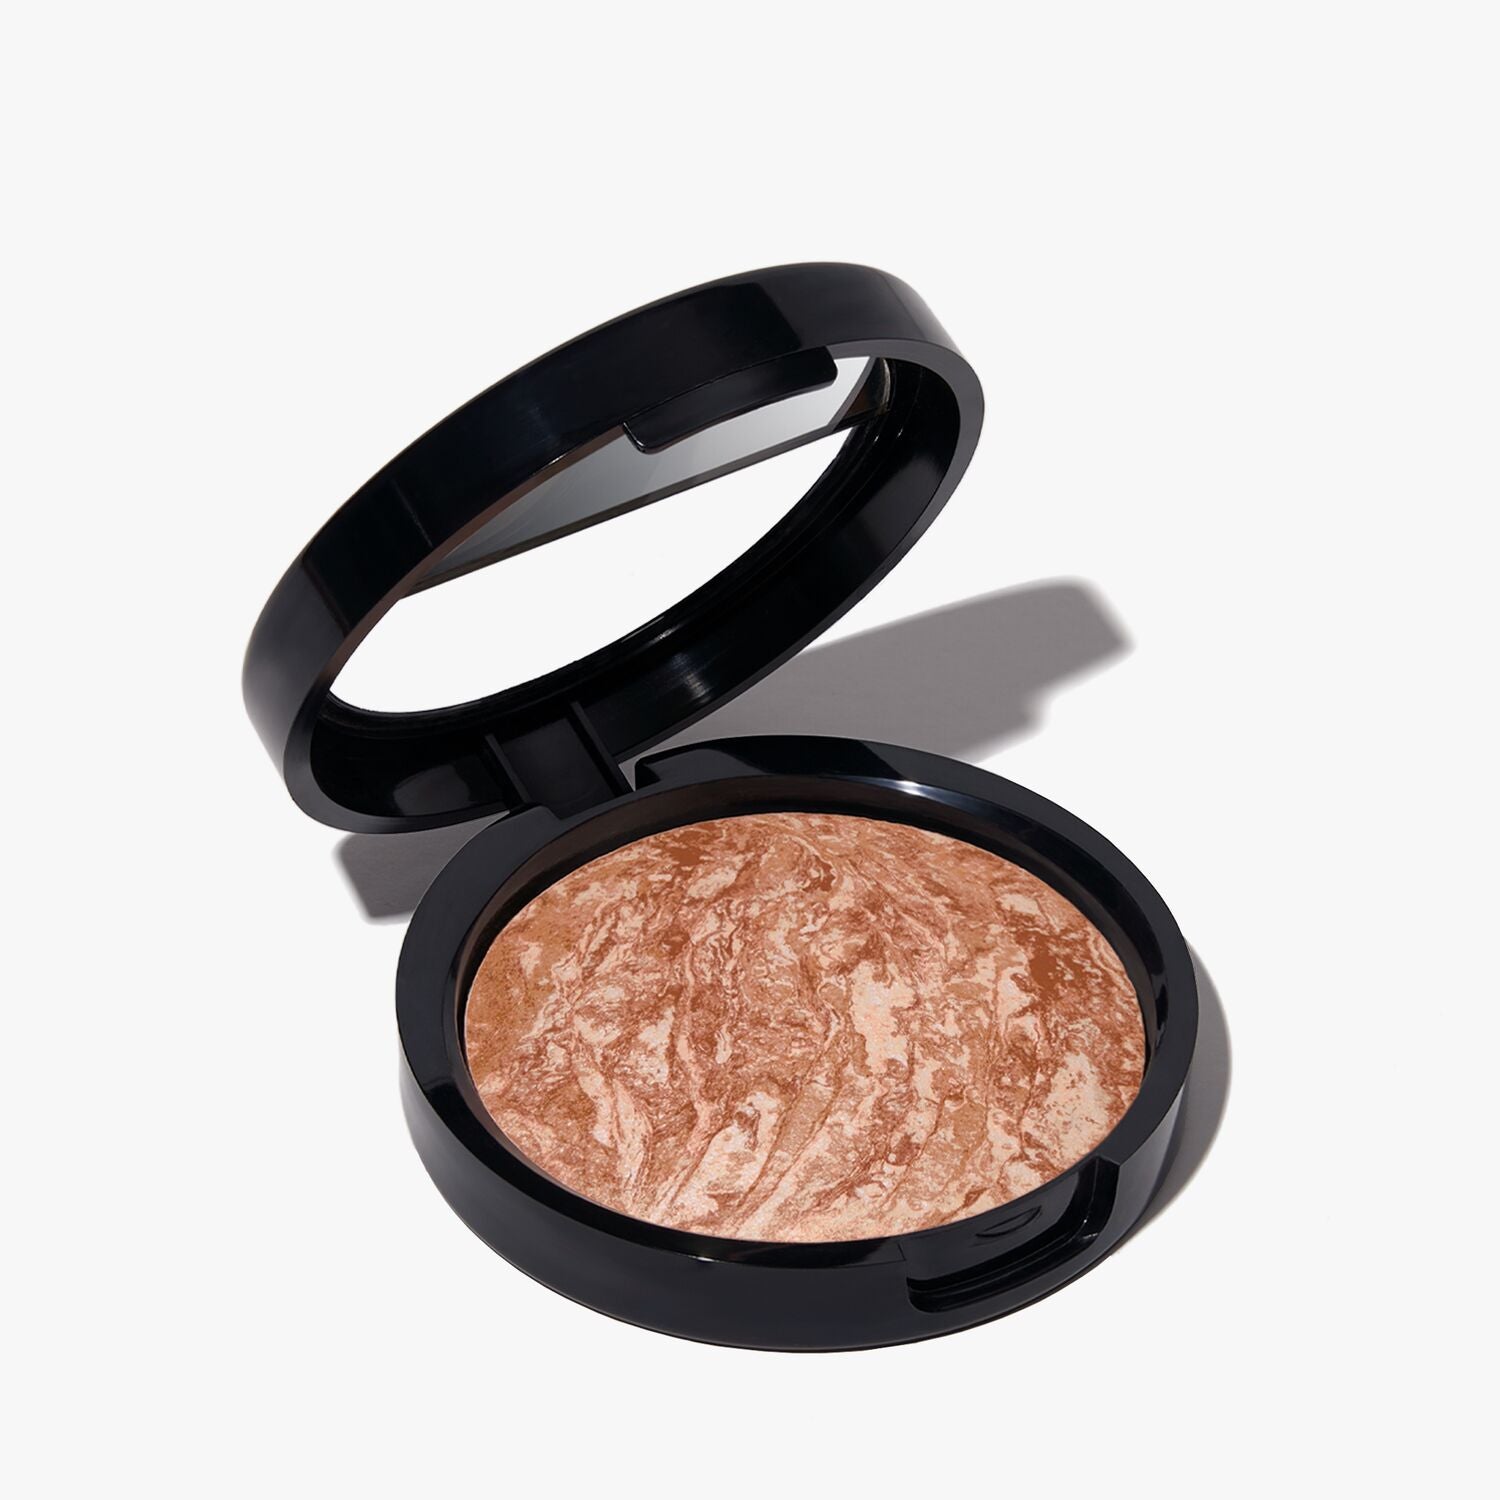 Laura Geller New York Baked Face and Body Frosting - Roman Holiday - 2 oz - Illuminating Bronzer Powder - Weightless Creamy Texture - Apply Wet or